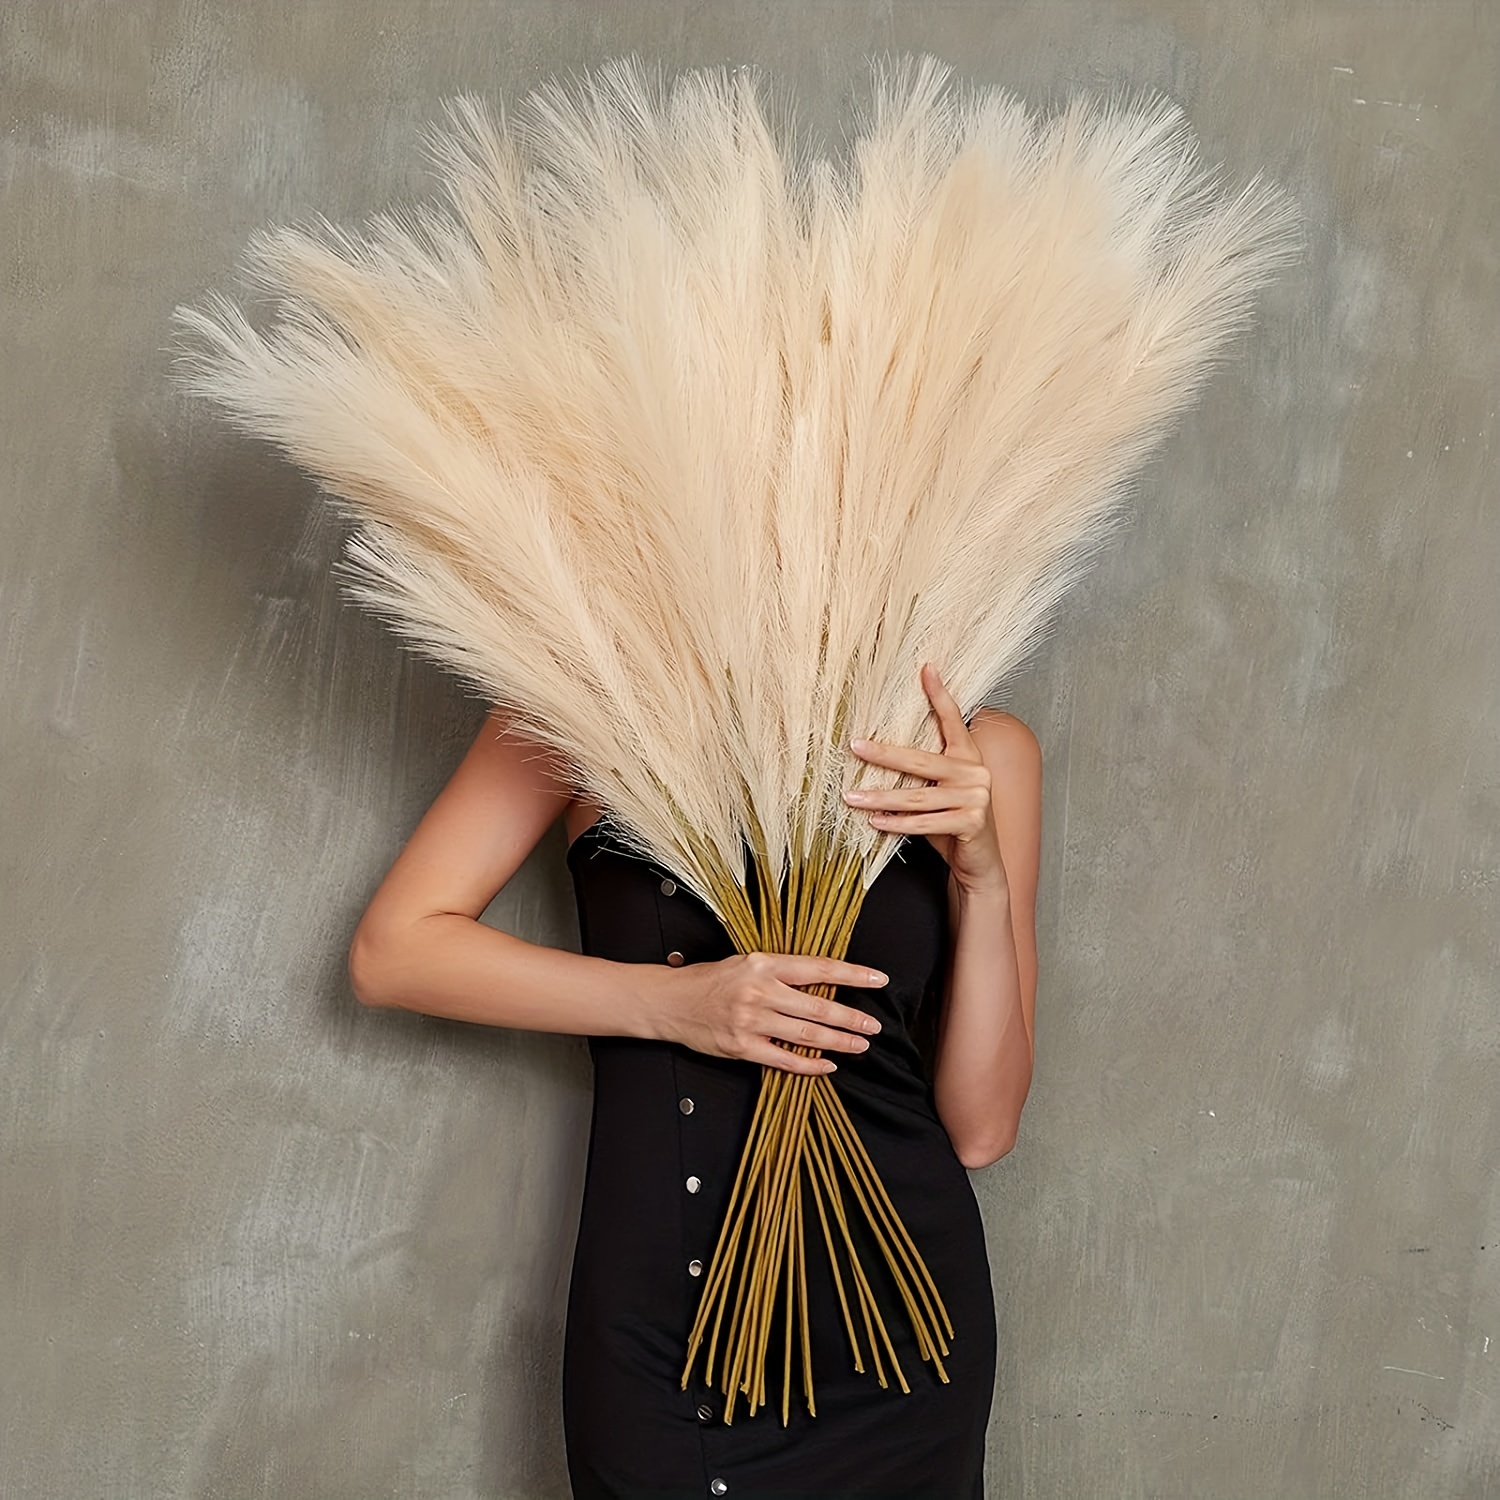 My Gold Swan Dried Pampas Grass Decor - 60 Pcs Small Pampas Grass - 17  Natural Dry Pampas Bouquet - Long-Lasting Pompous Grass for Boho Wedding 